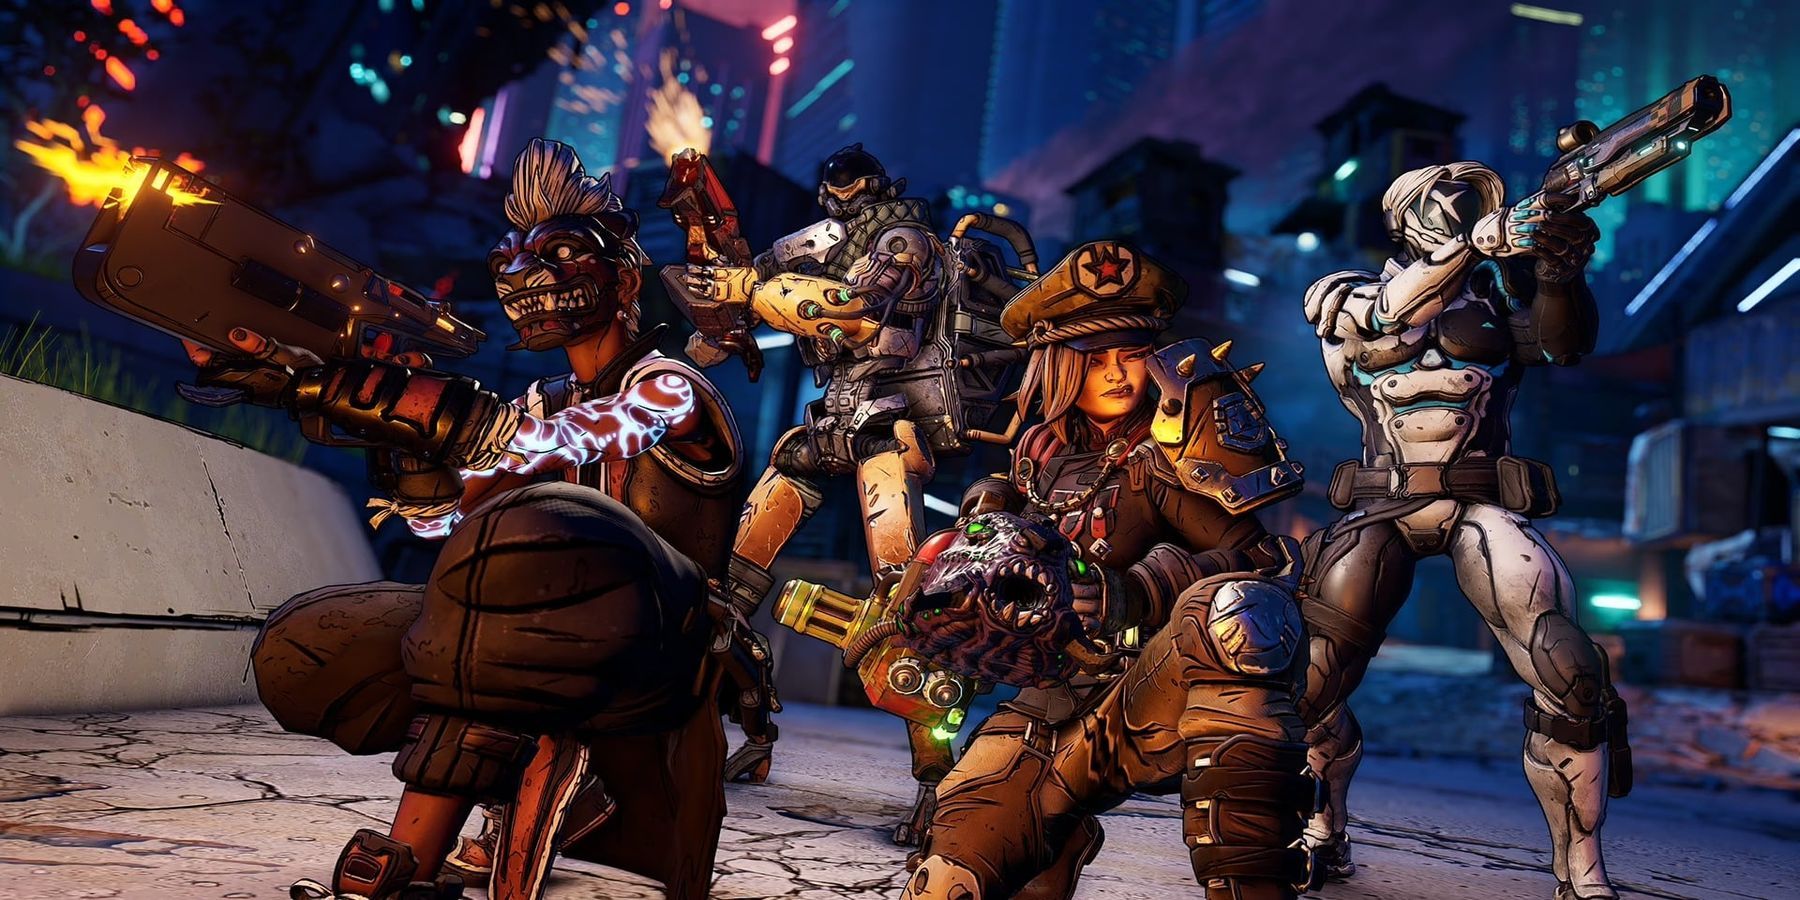 Image showing the main playable characters in Borderlands 3.